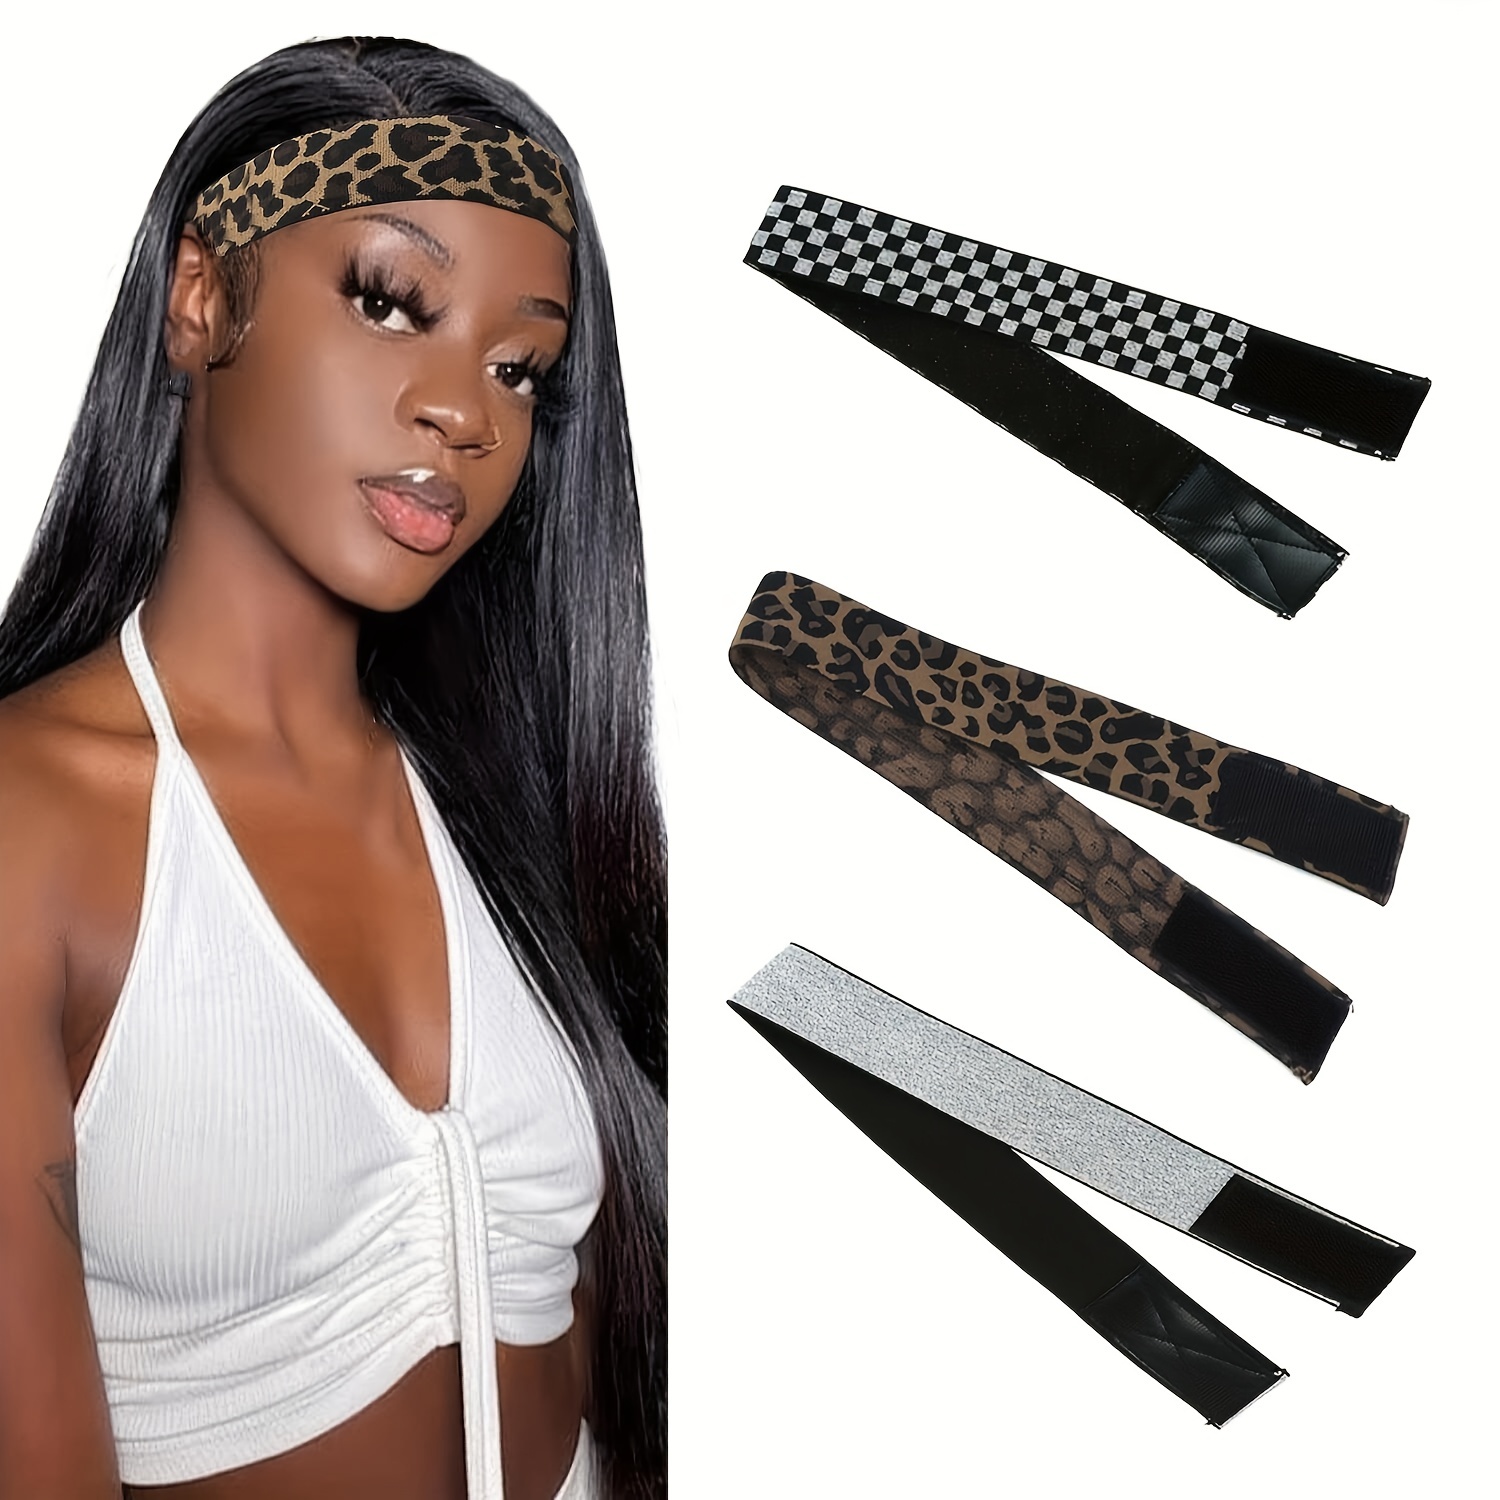 Wig Elastic Band For Adjustable Elastic Band ,Lace Band For Wig Install ,  For Lace Frontal Melt Keeping Wig Grip No Slip